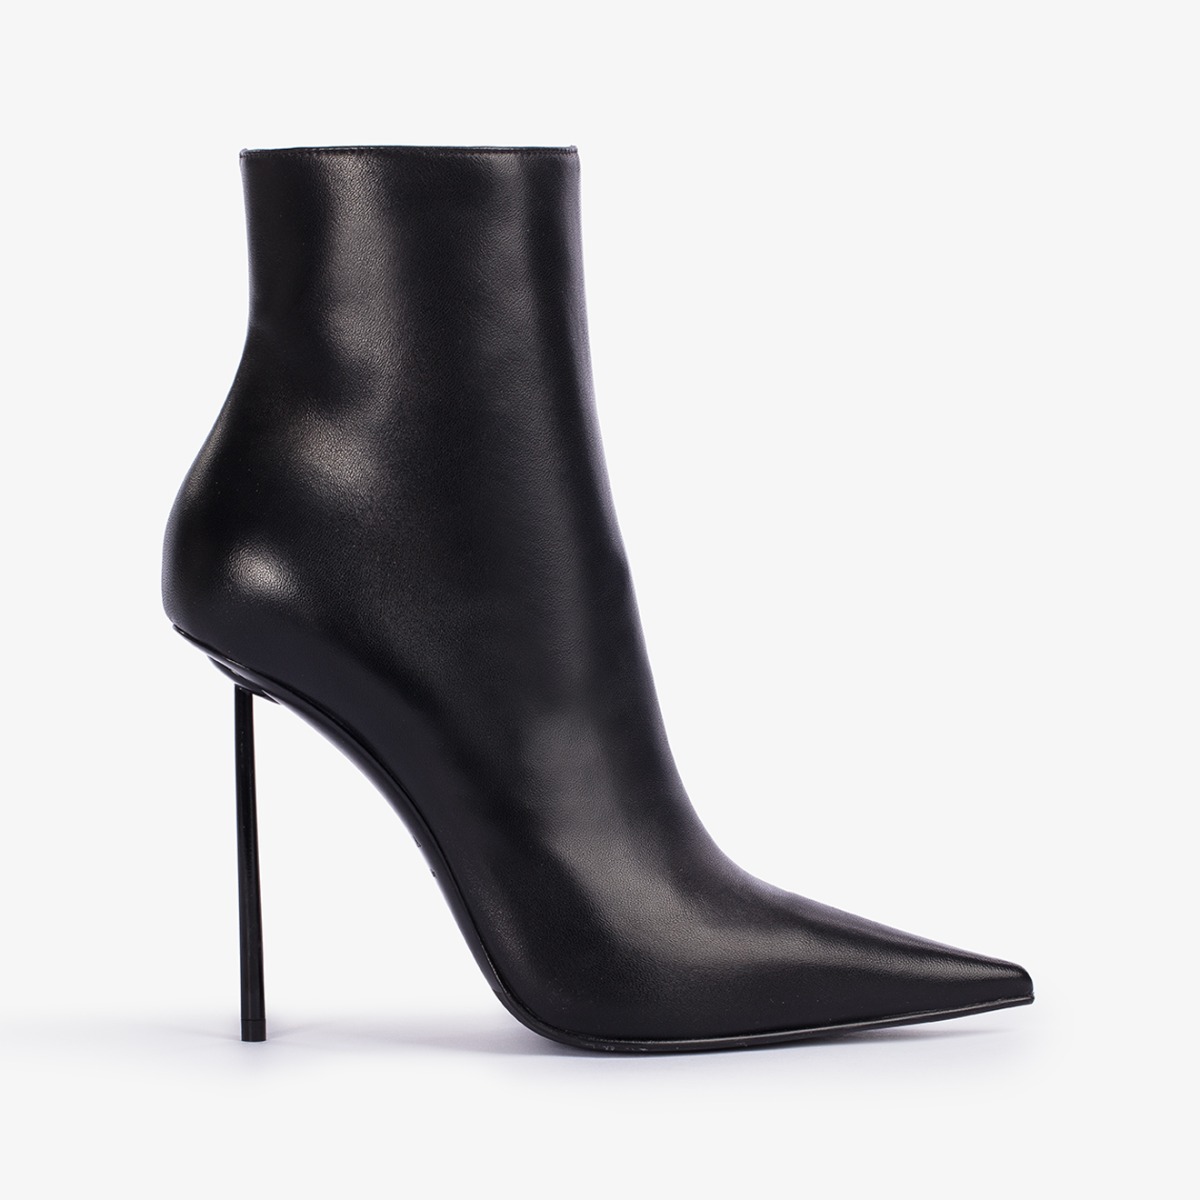 Black leather ankle boot - Le Silla